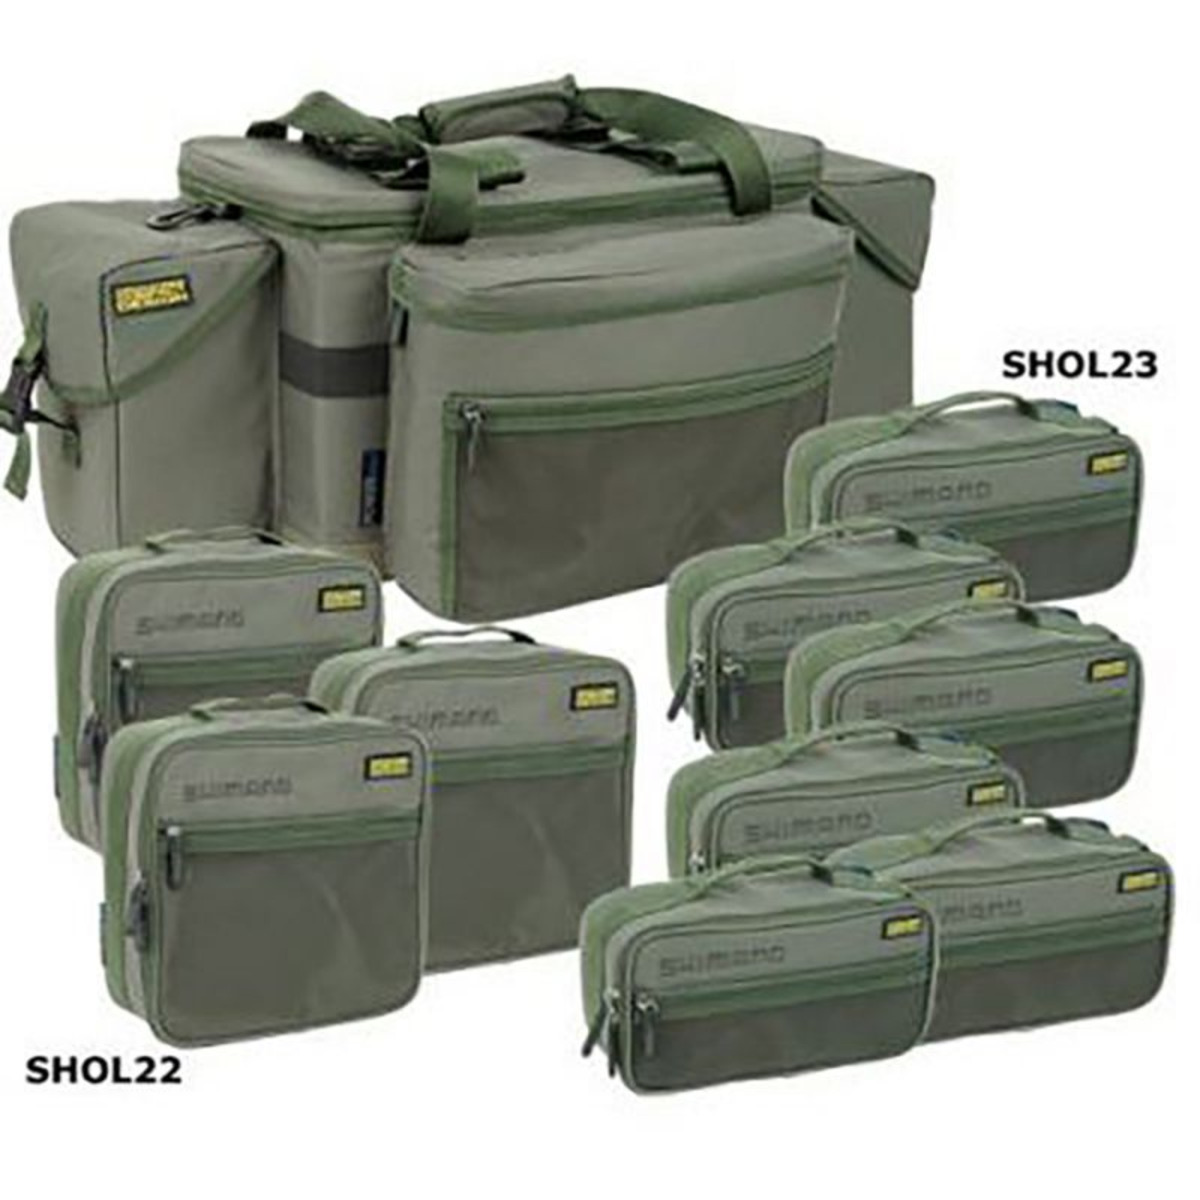 Shimano Olive Compact System Carryall - 